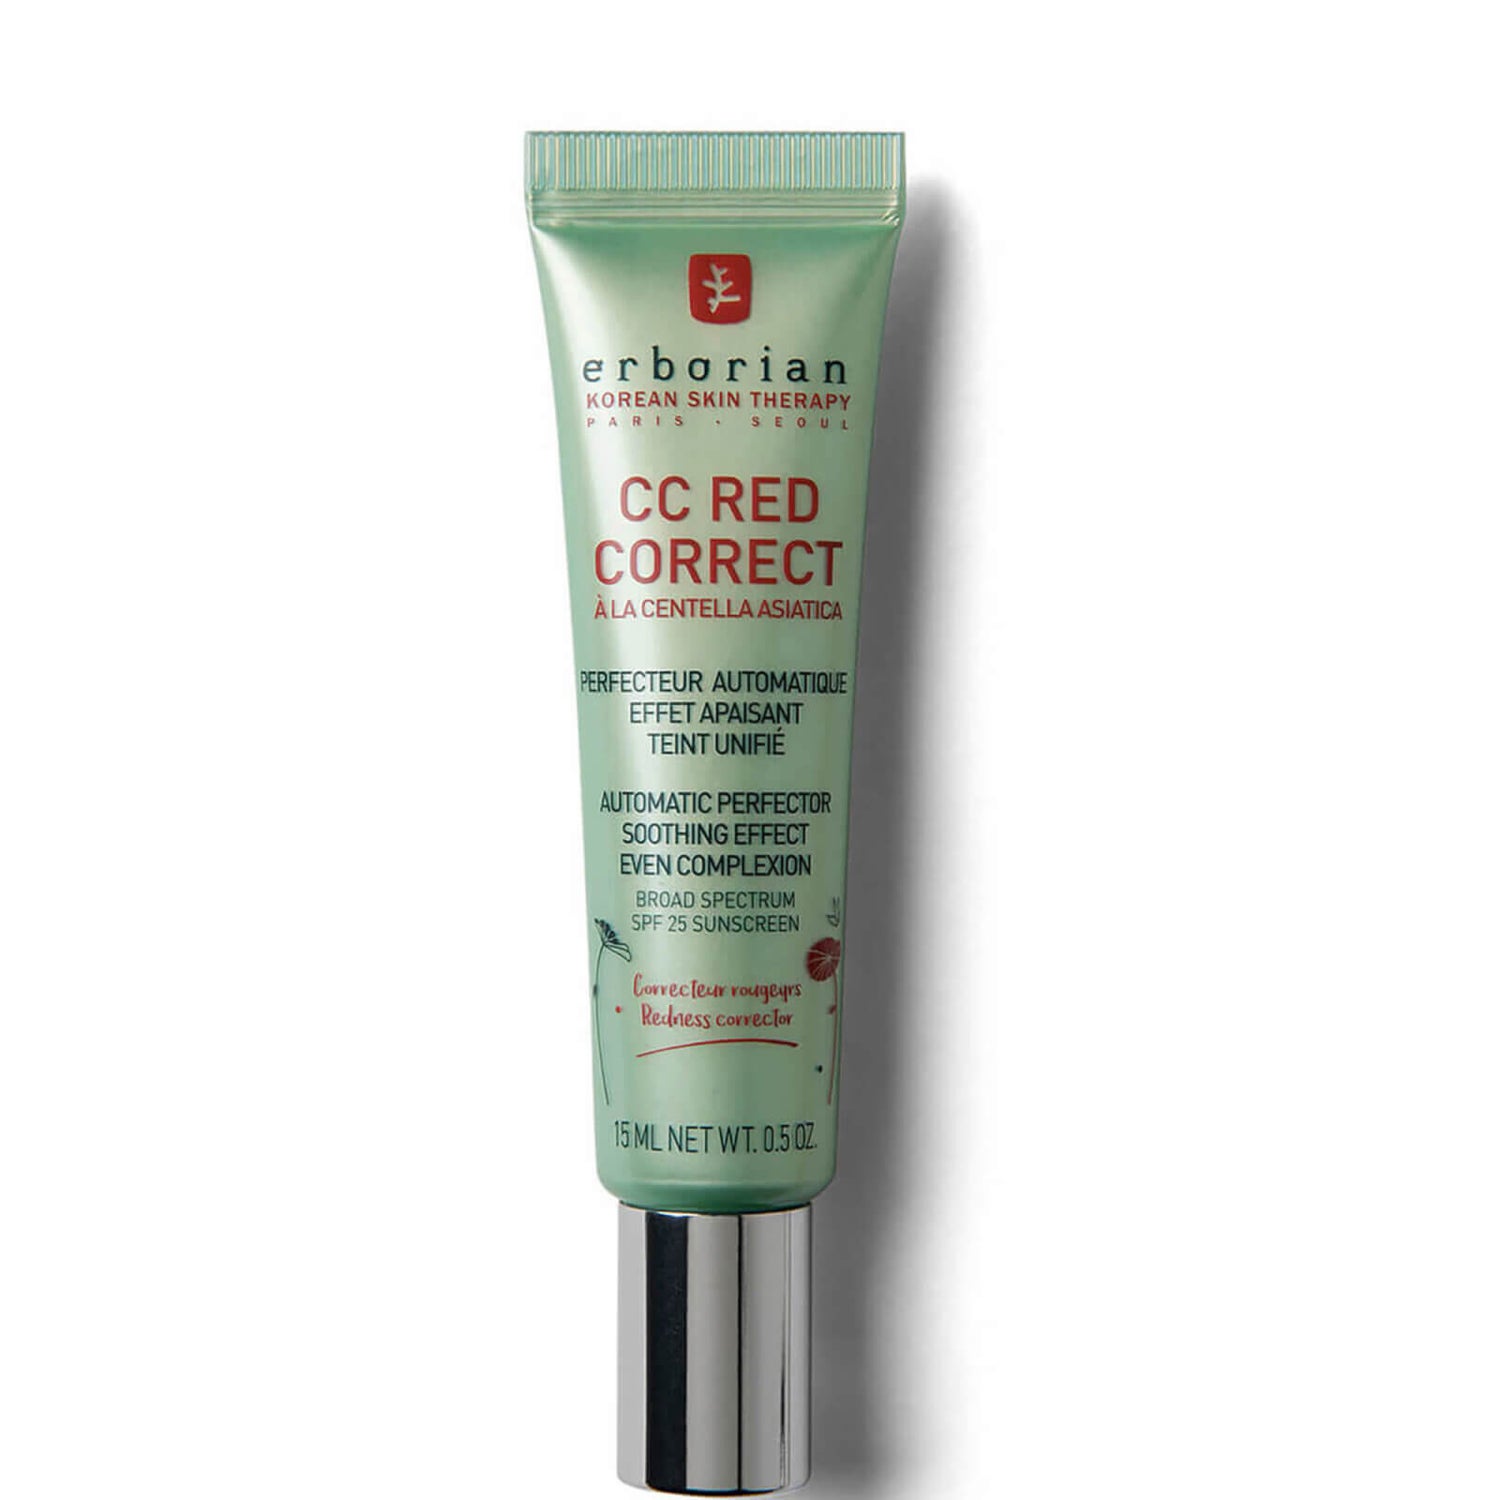 Erborian CC Red Correct - Colour Correcting Anti-Redness Cream With Soothing Effect SPF25 Travel Size 15ml